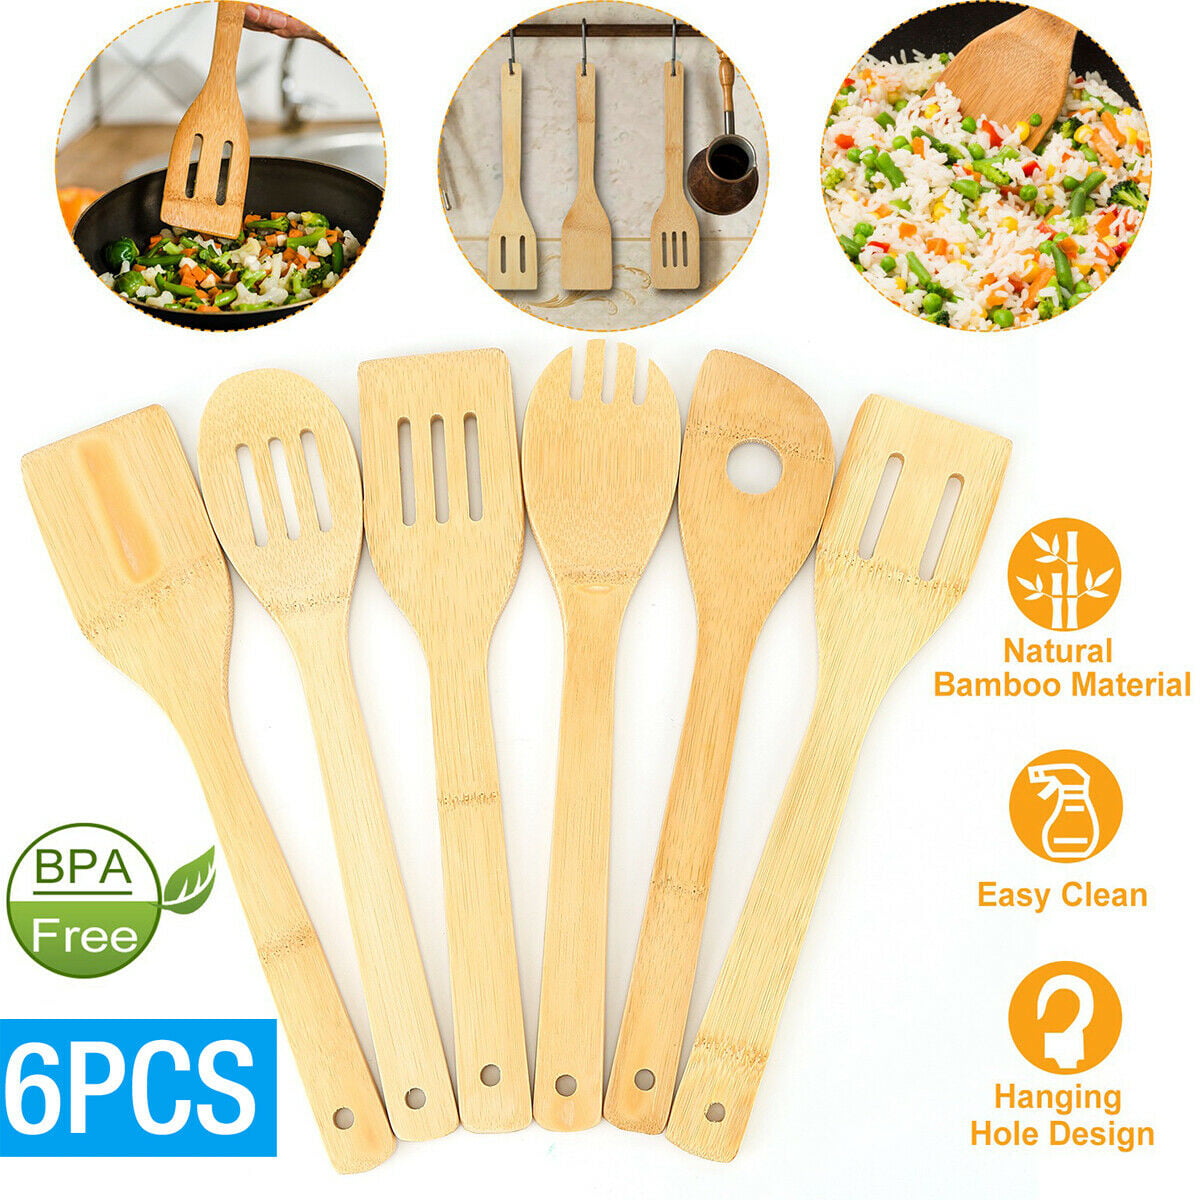 Wooden Kitchen Cooking Utensils Set 6 Pcs Wooden Spoons /& Spatula Cooking Tools